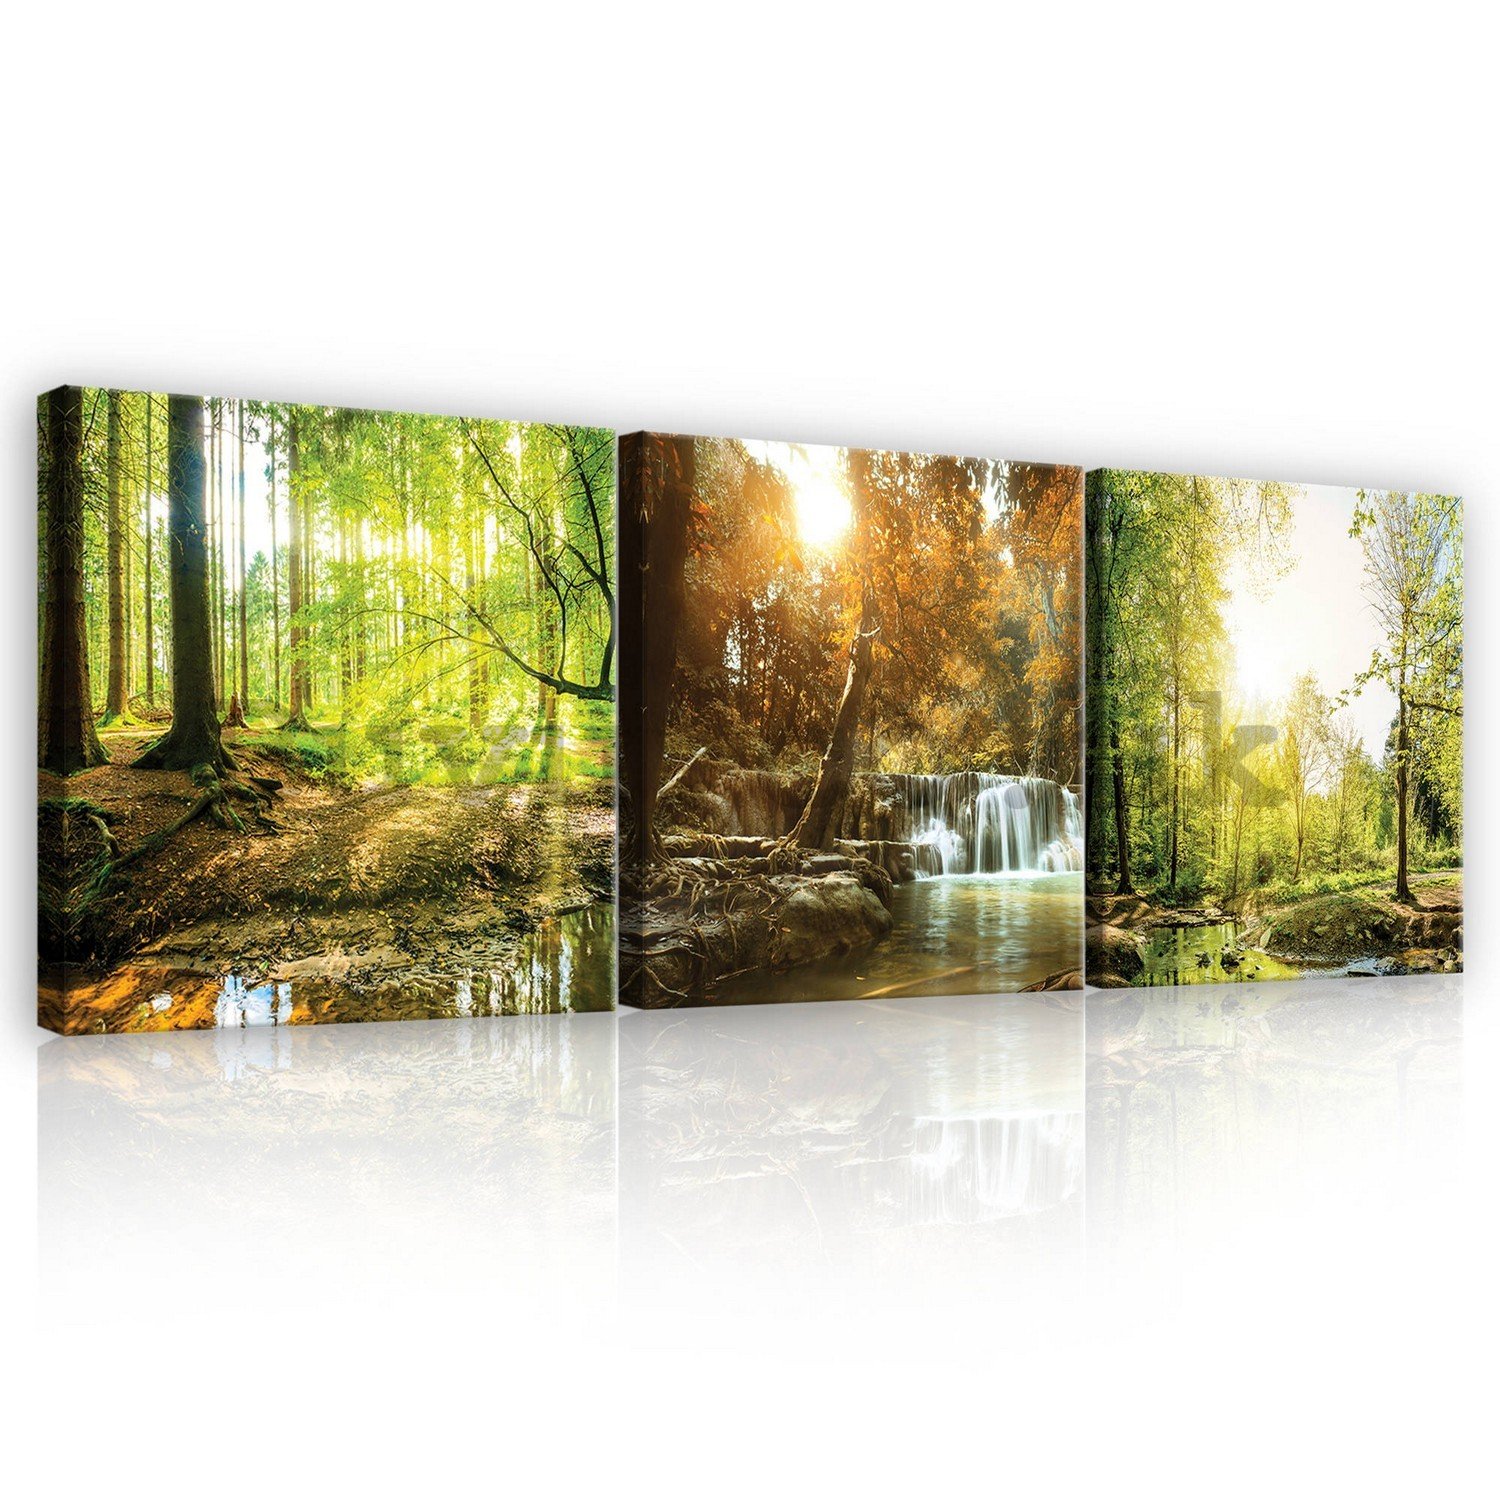 Painting on canvas: Forest stream - set 3pcs 25x25cm